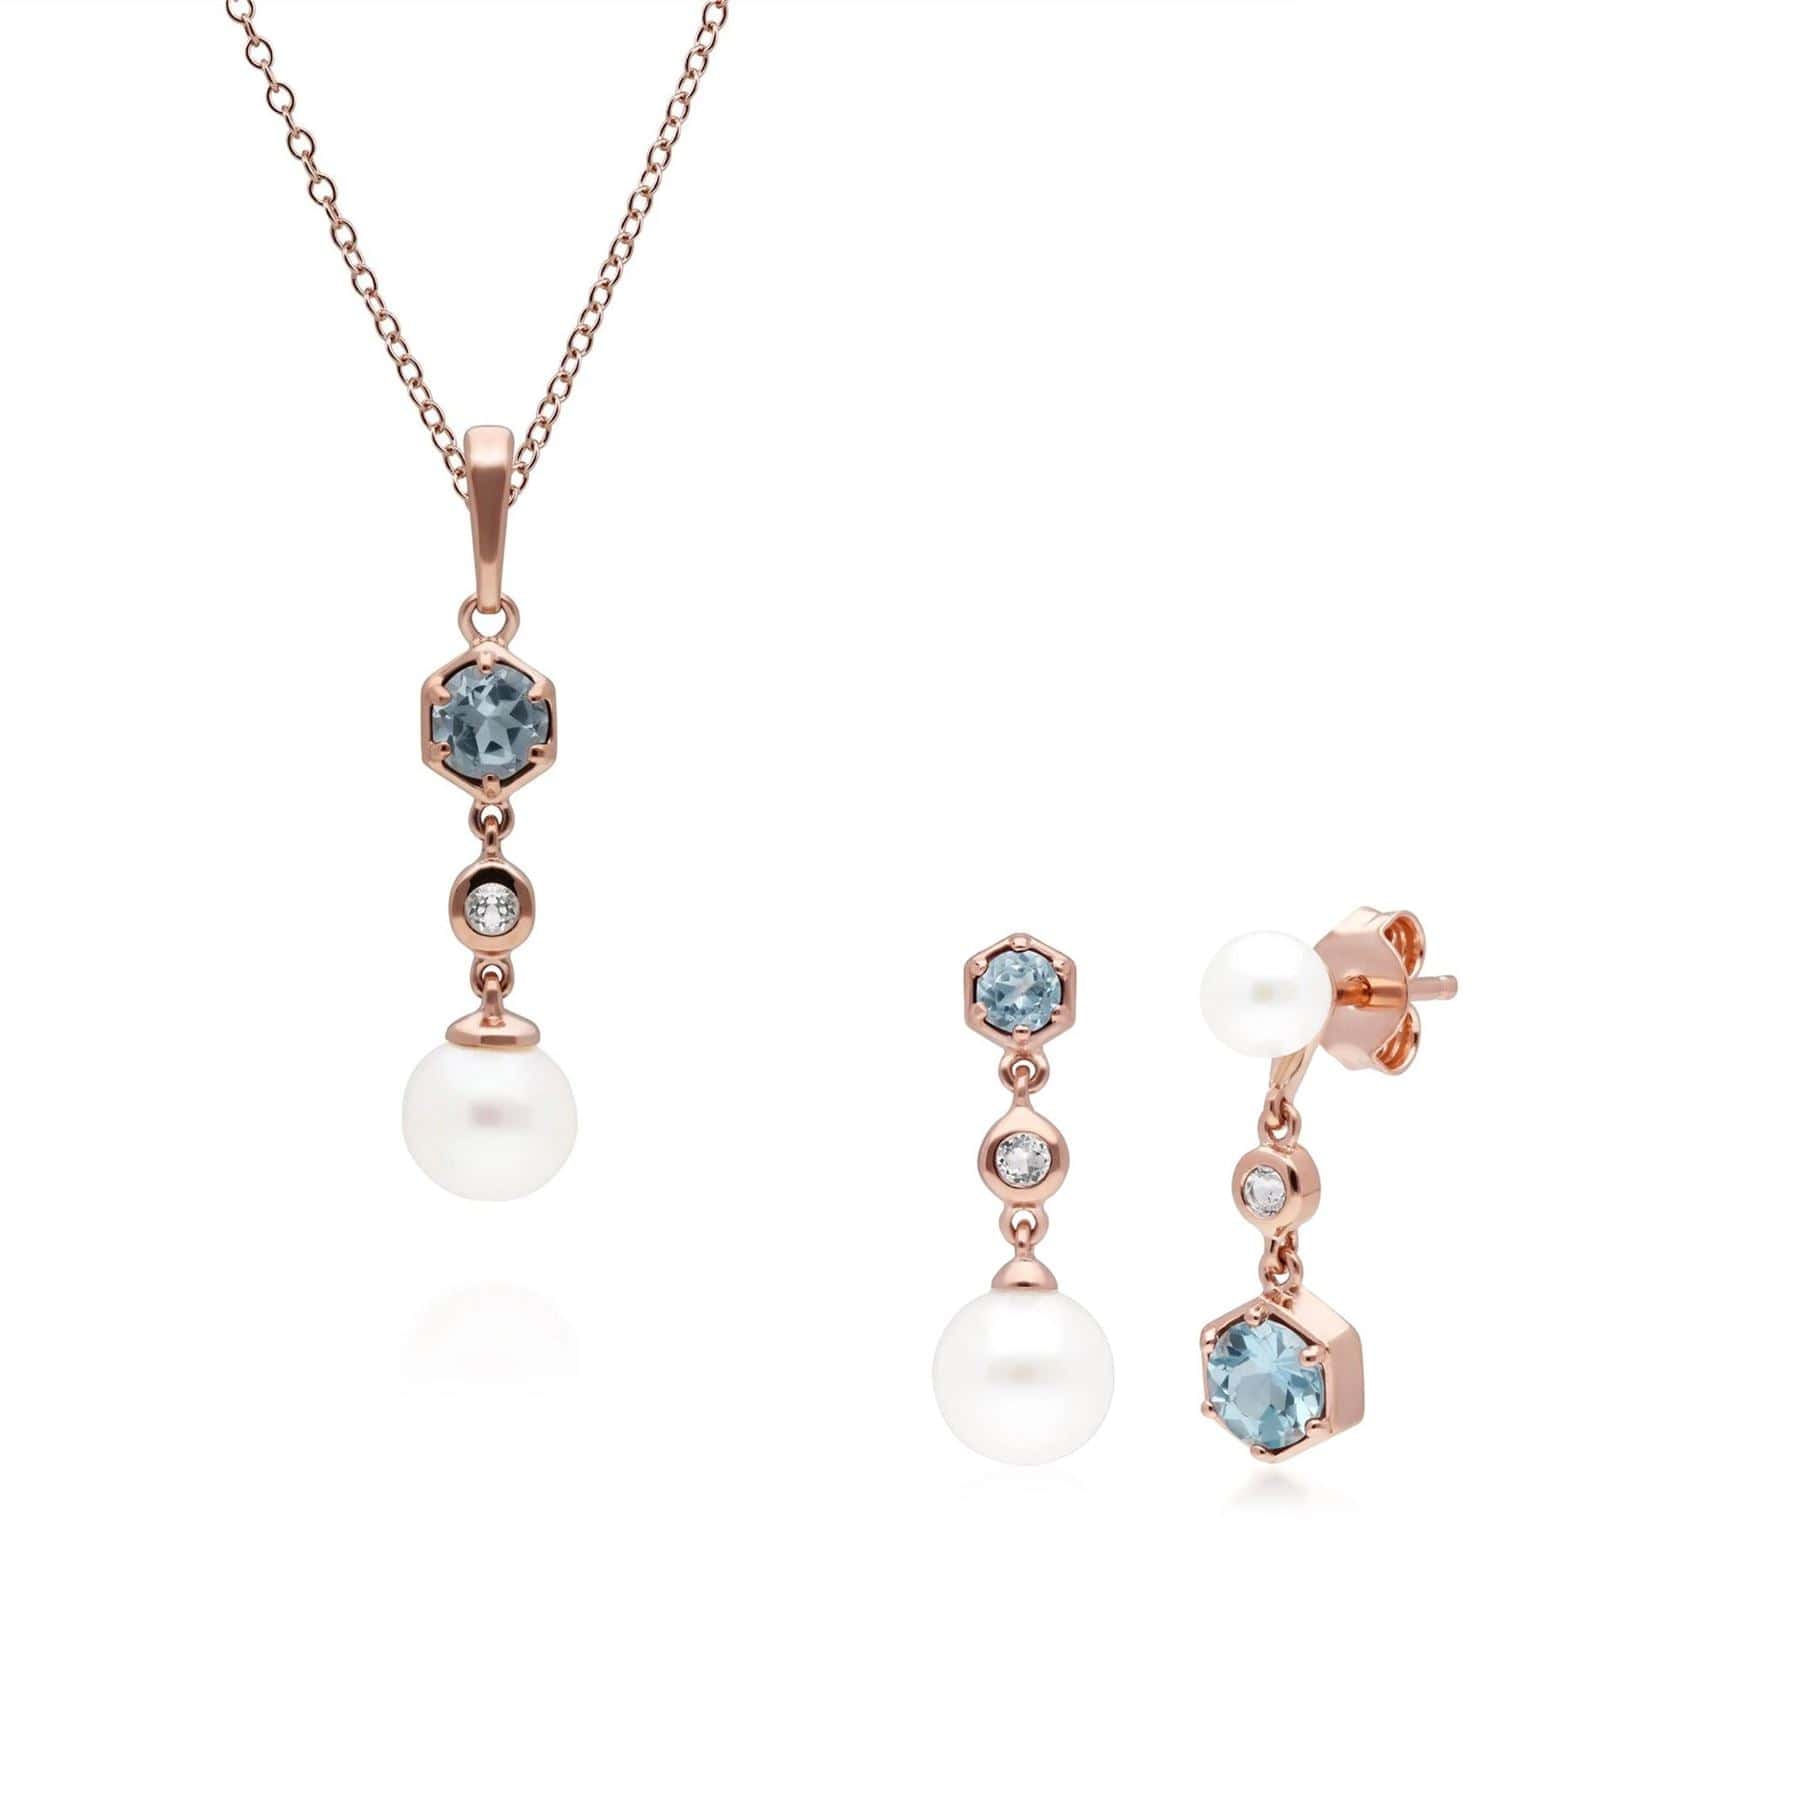 270P030310925-270E030310925 Modern Pearl & Topaz Earrings & Necklace Set in Rose Gold Plated Silver 1